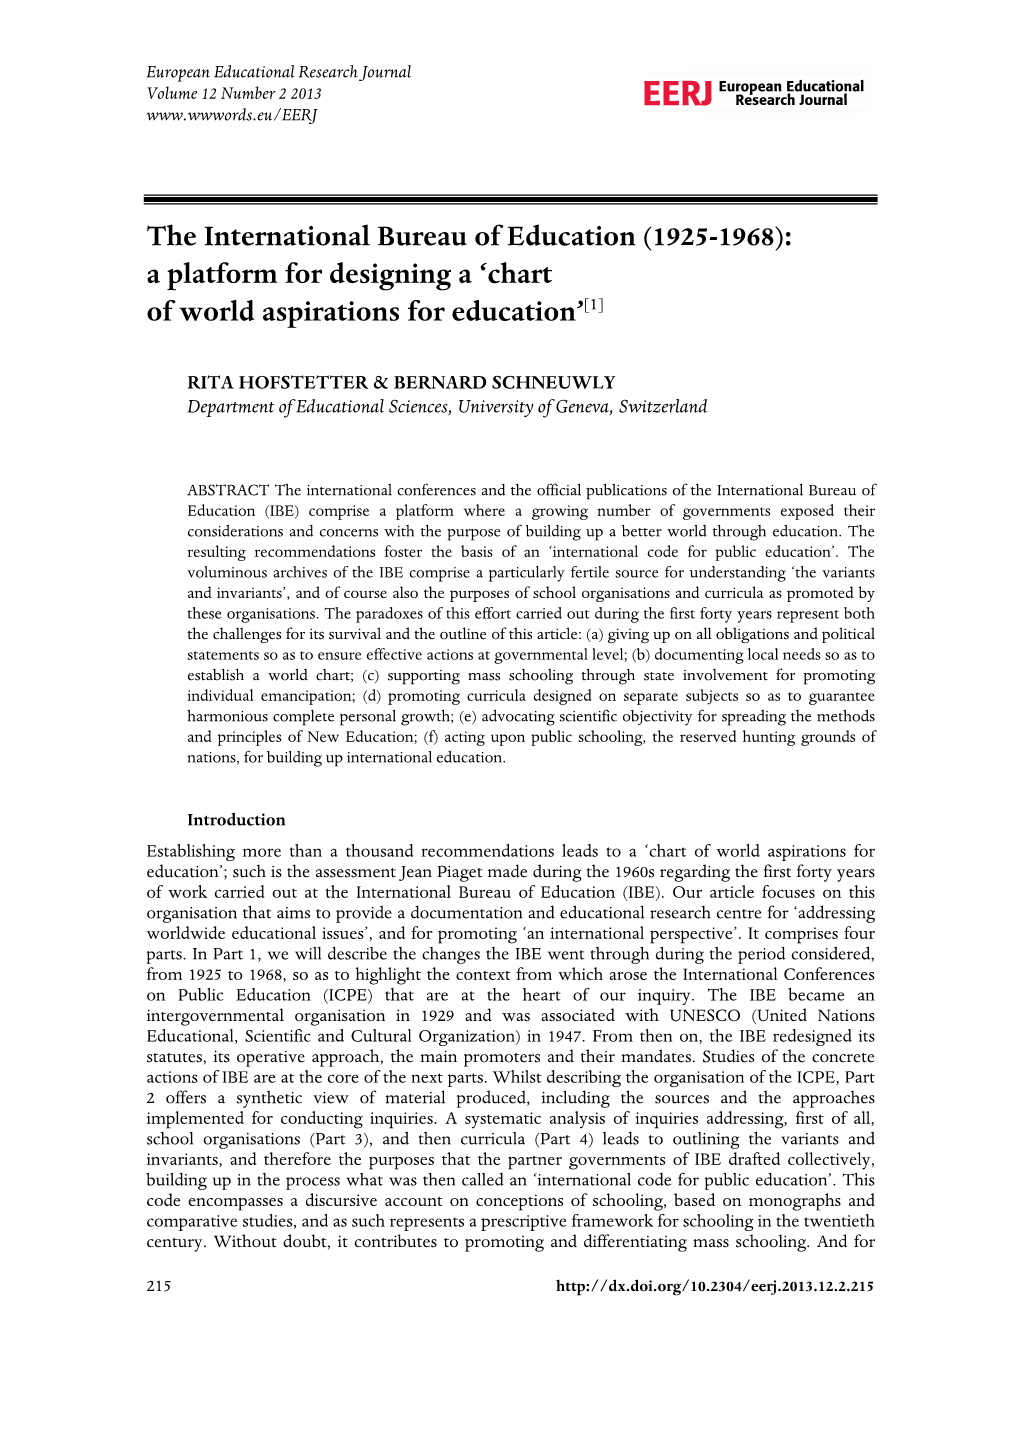 The International Bureau of Education (1925-1968): a Platform for Designing a ‘Chart of World Aspirations for Education’[1]